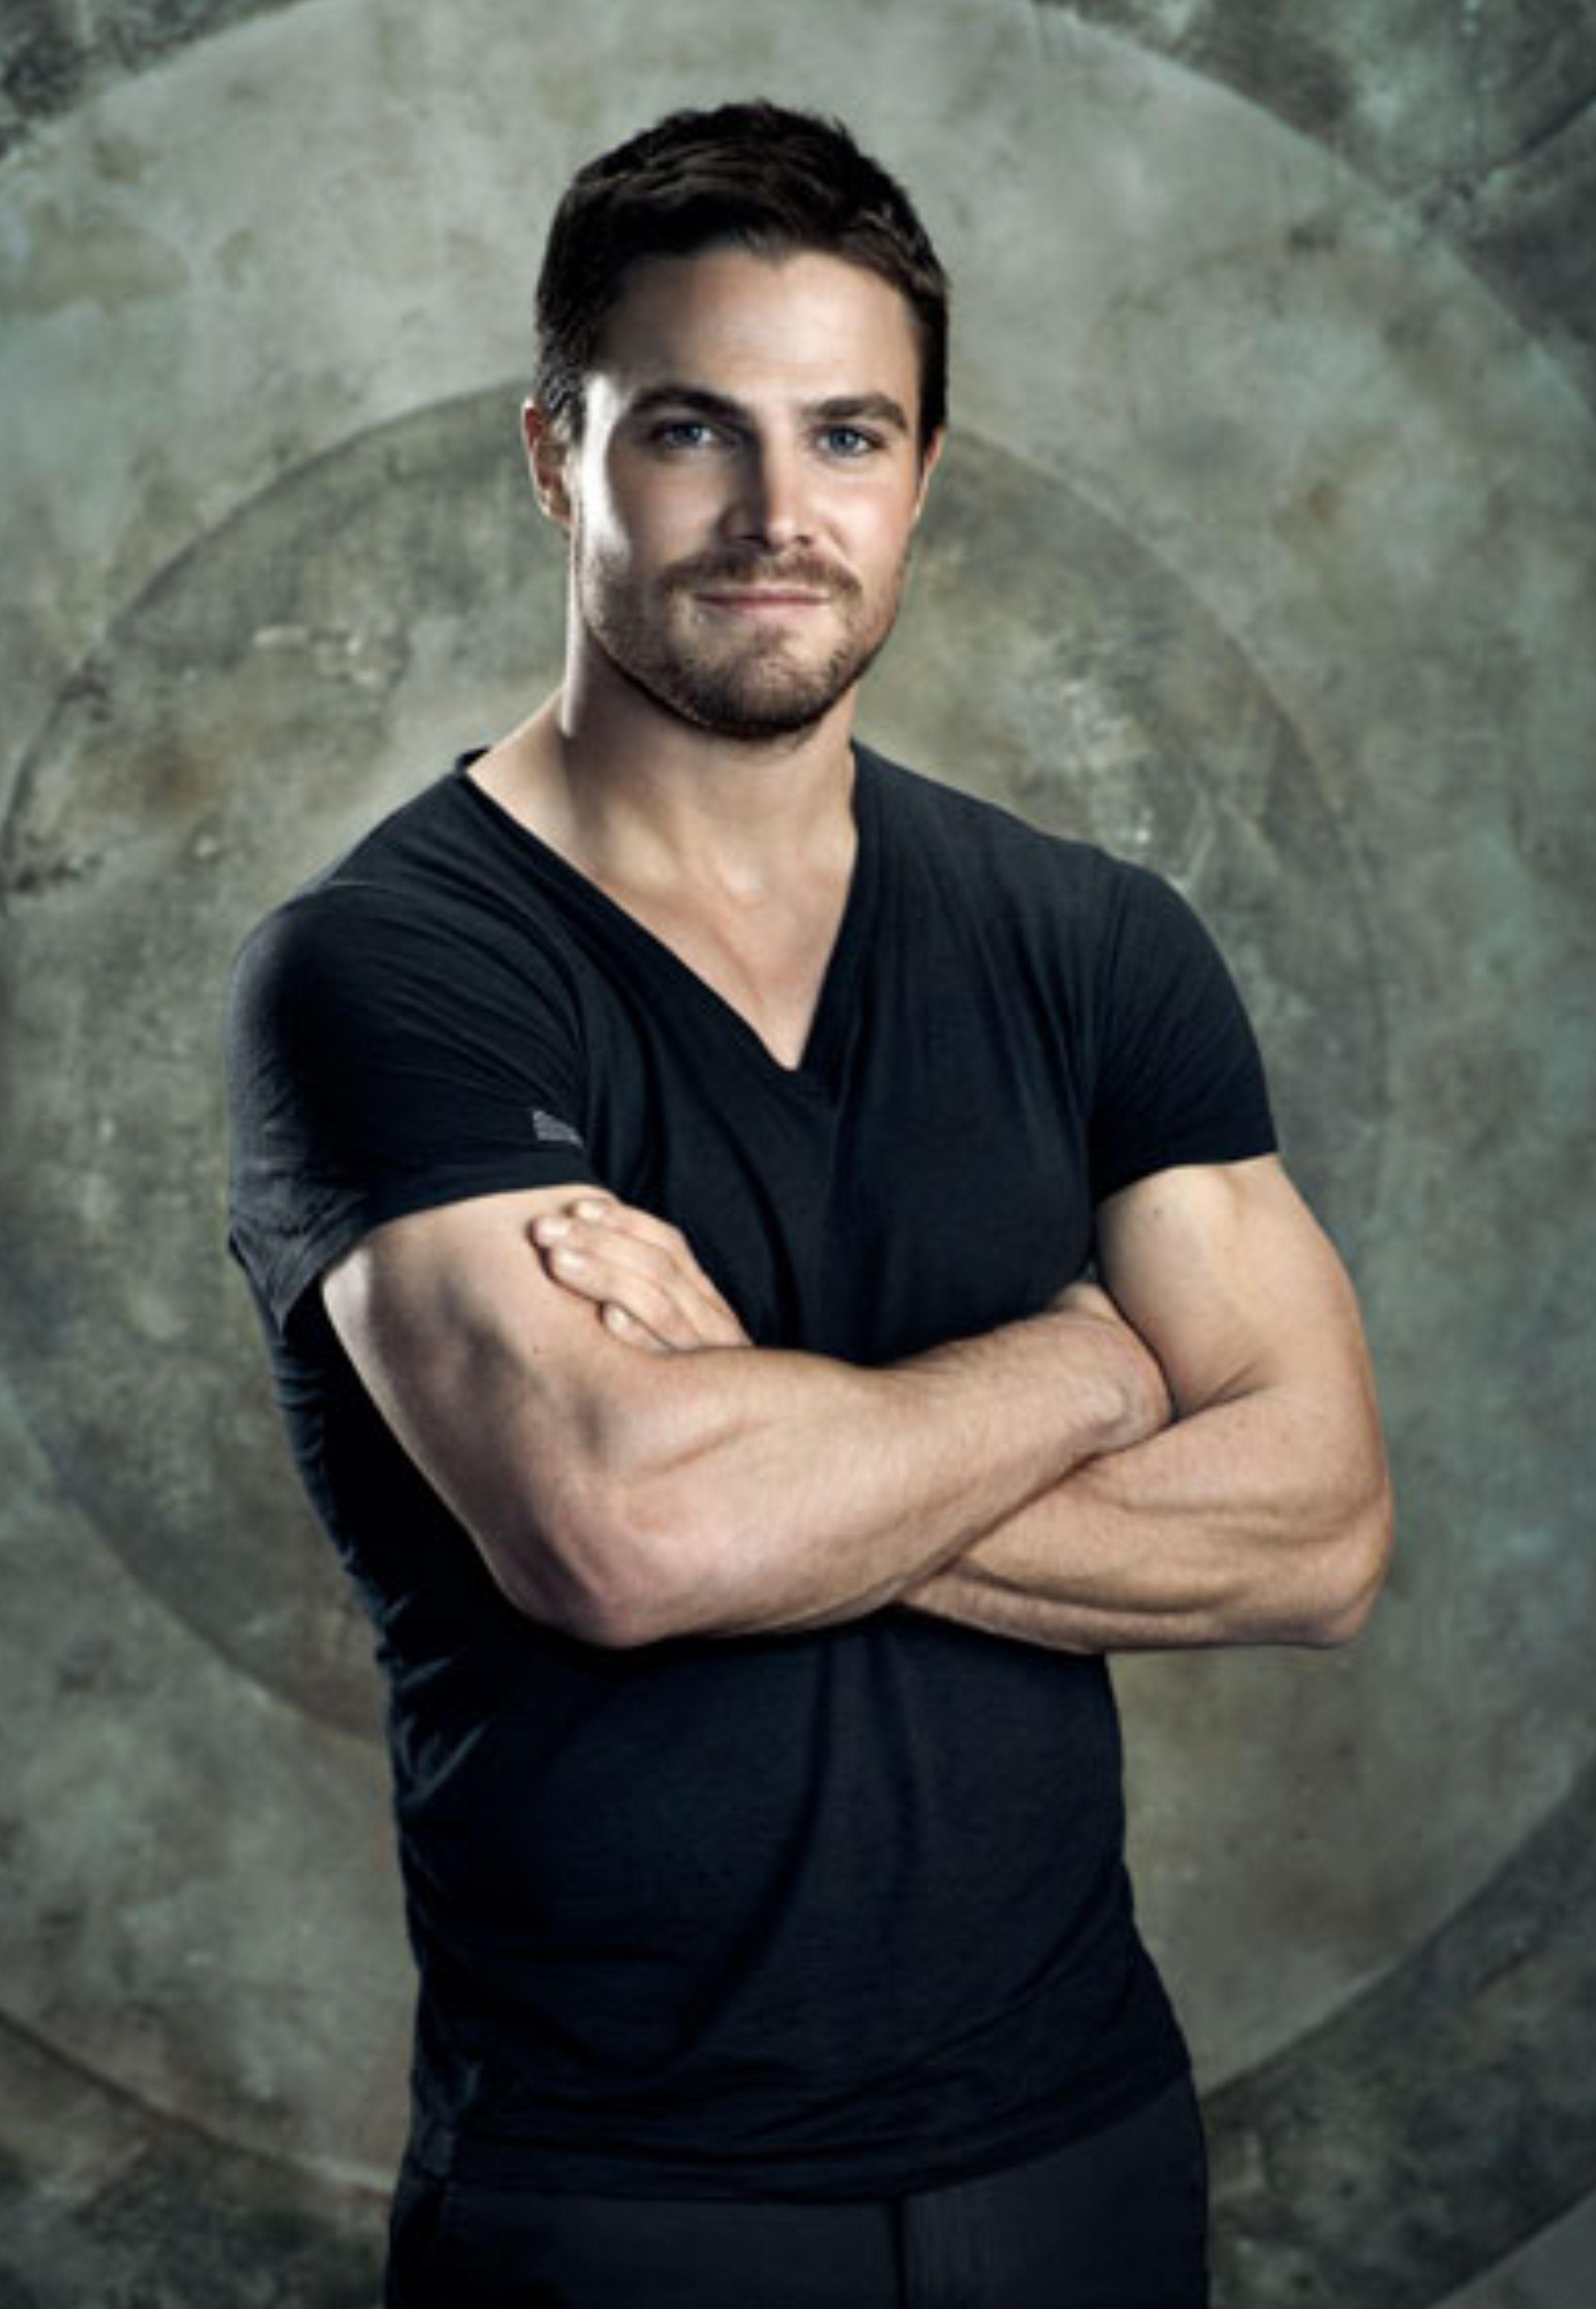 Stephen Amell Wallpapers Top Free Stephen Amell Backgrounds Wallpaperaccess 2079